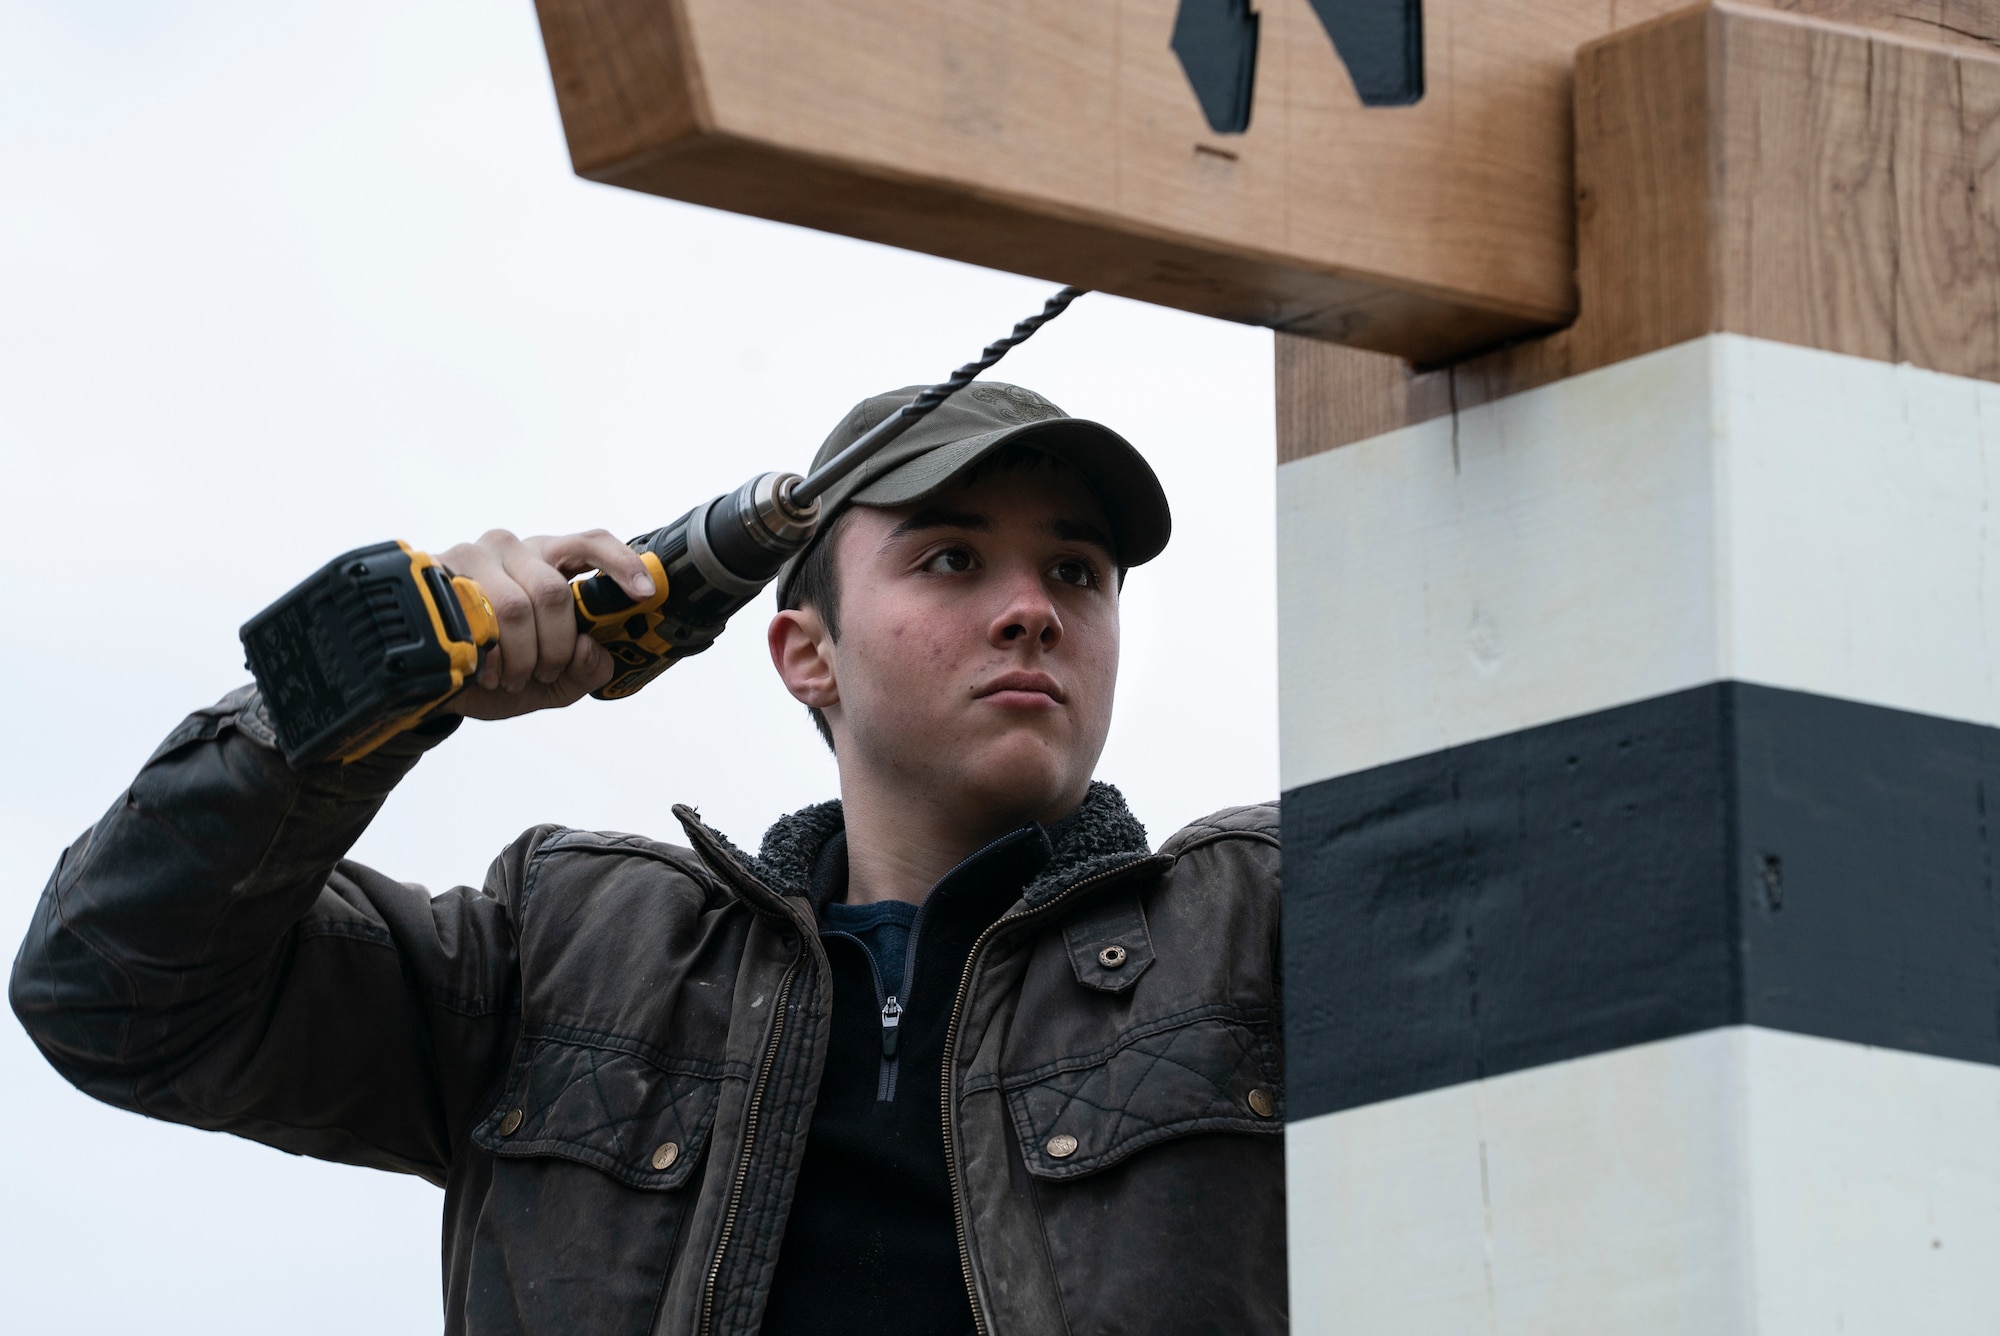 Cole Heard, son of Lt. Col. Jason Heard, 48th Fighter Wing Chief of Plans and Programs, drills into the top structure of the arch during construction at Royal Air Force Lakenheath, England, March 6, 2021. The arch was built as an Eagle Scout project, an opportunity for a Scout to demonstrate leadership abilities while completing a project for the benefit of their community. (U.S. Air Force photo by Airman 1st Class Jessi Monte)